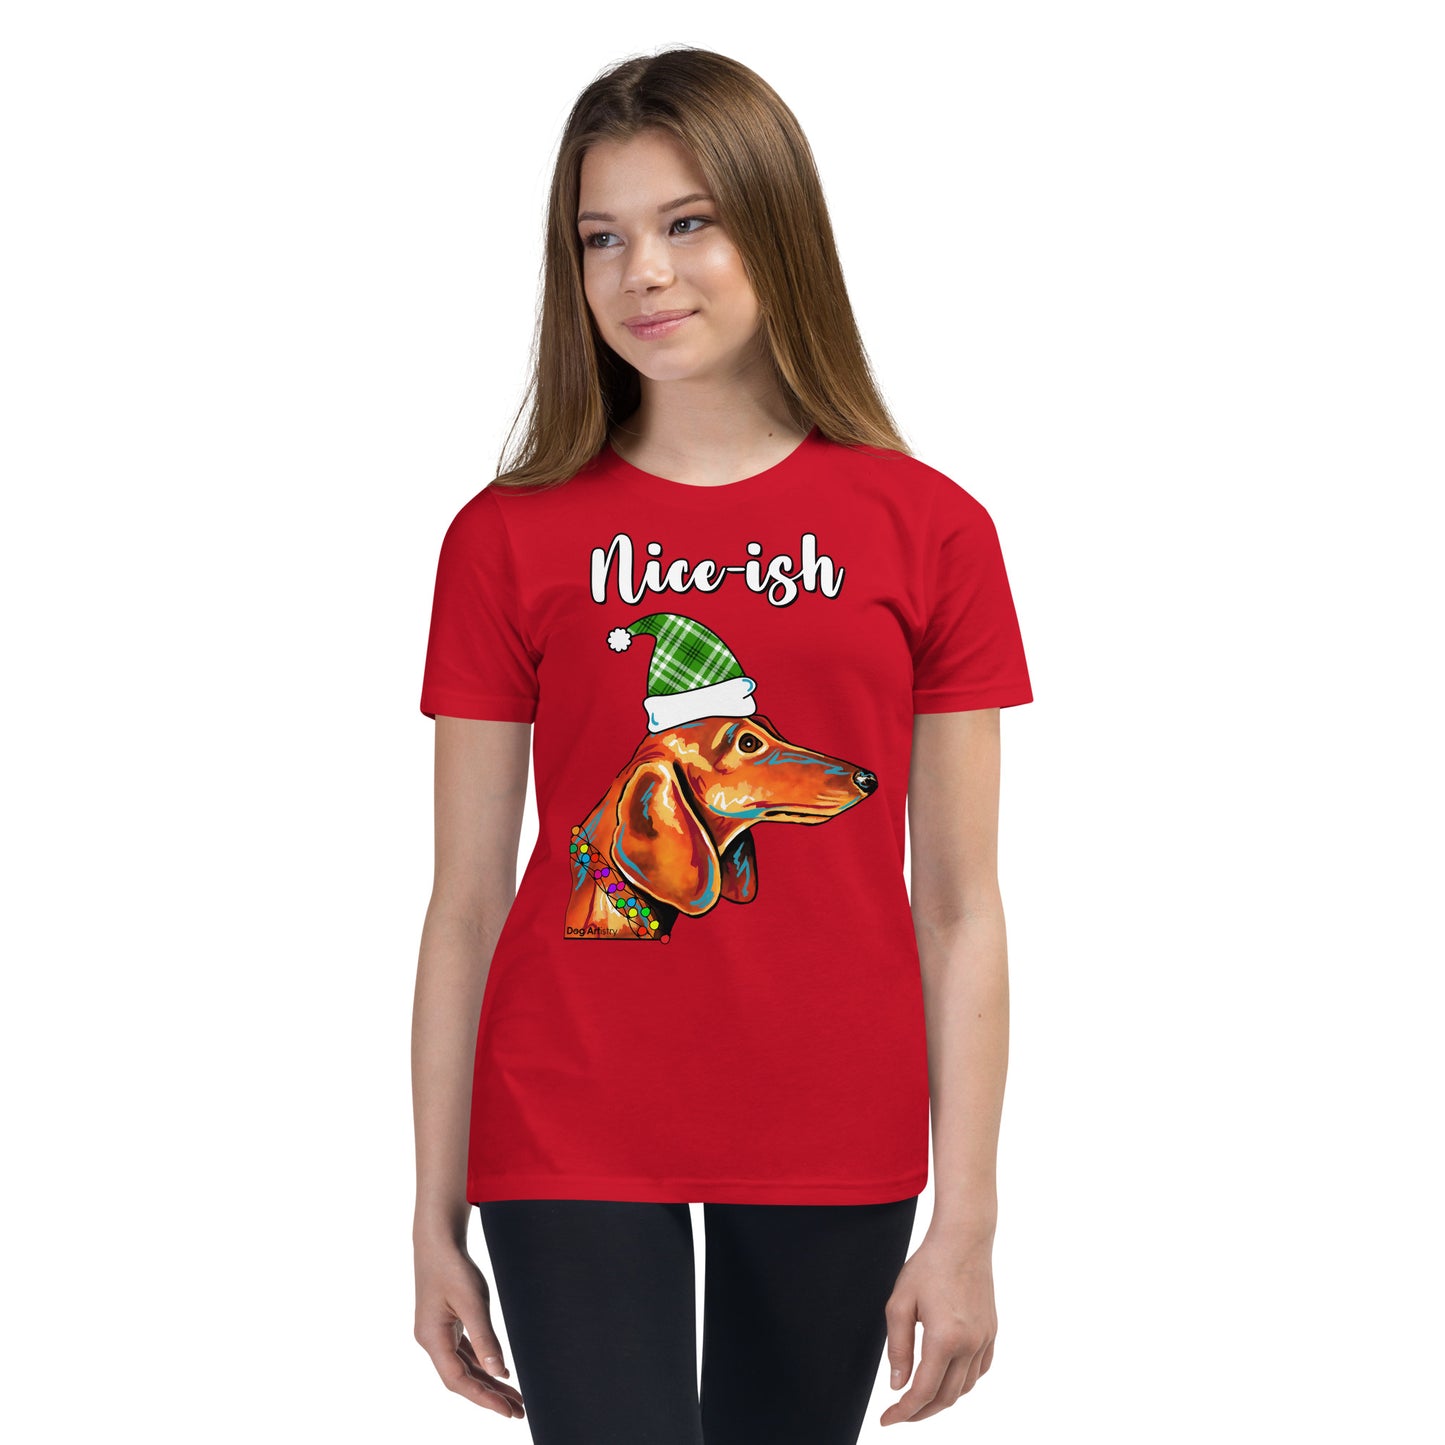 Nice-Ish Dachshund Holiday youth t-shirt red by Dog Artistry.